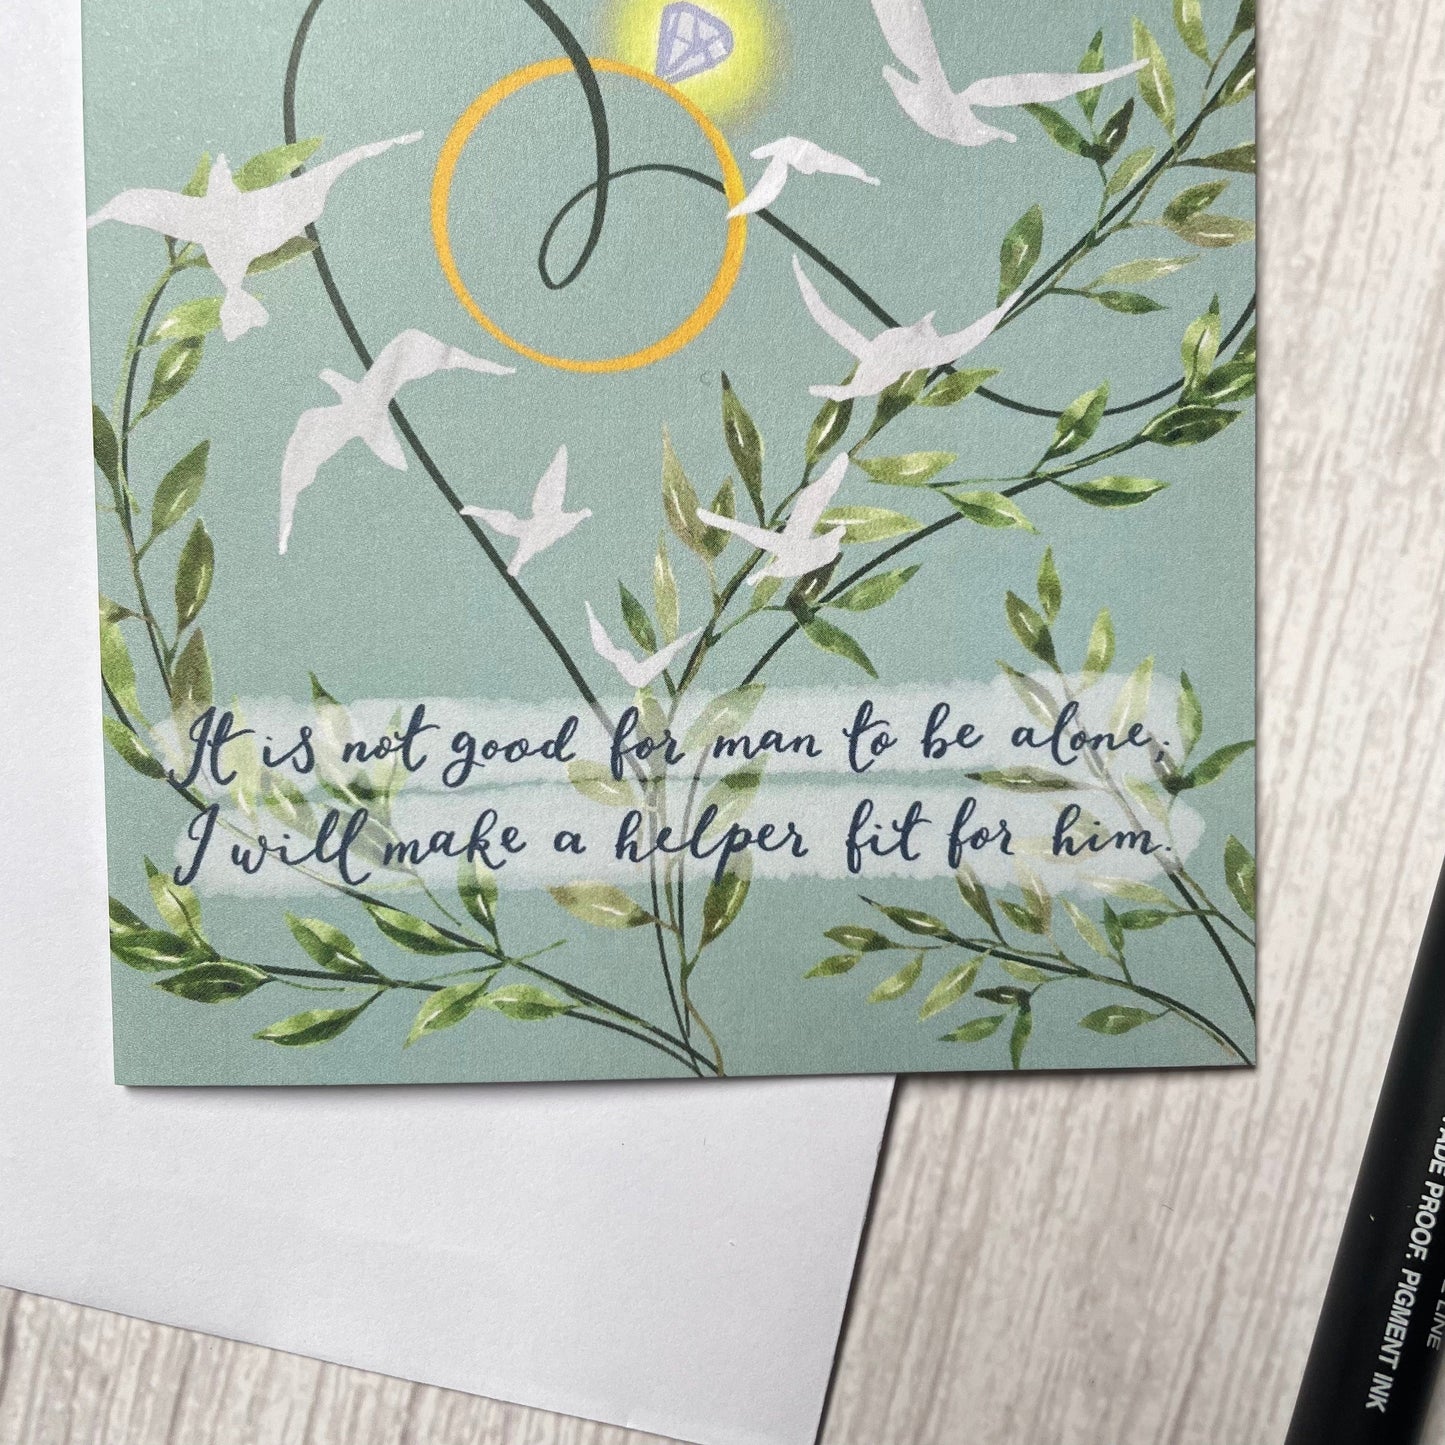 Christian engagement card Cards And Hope Designs   